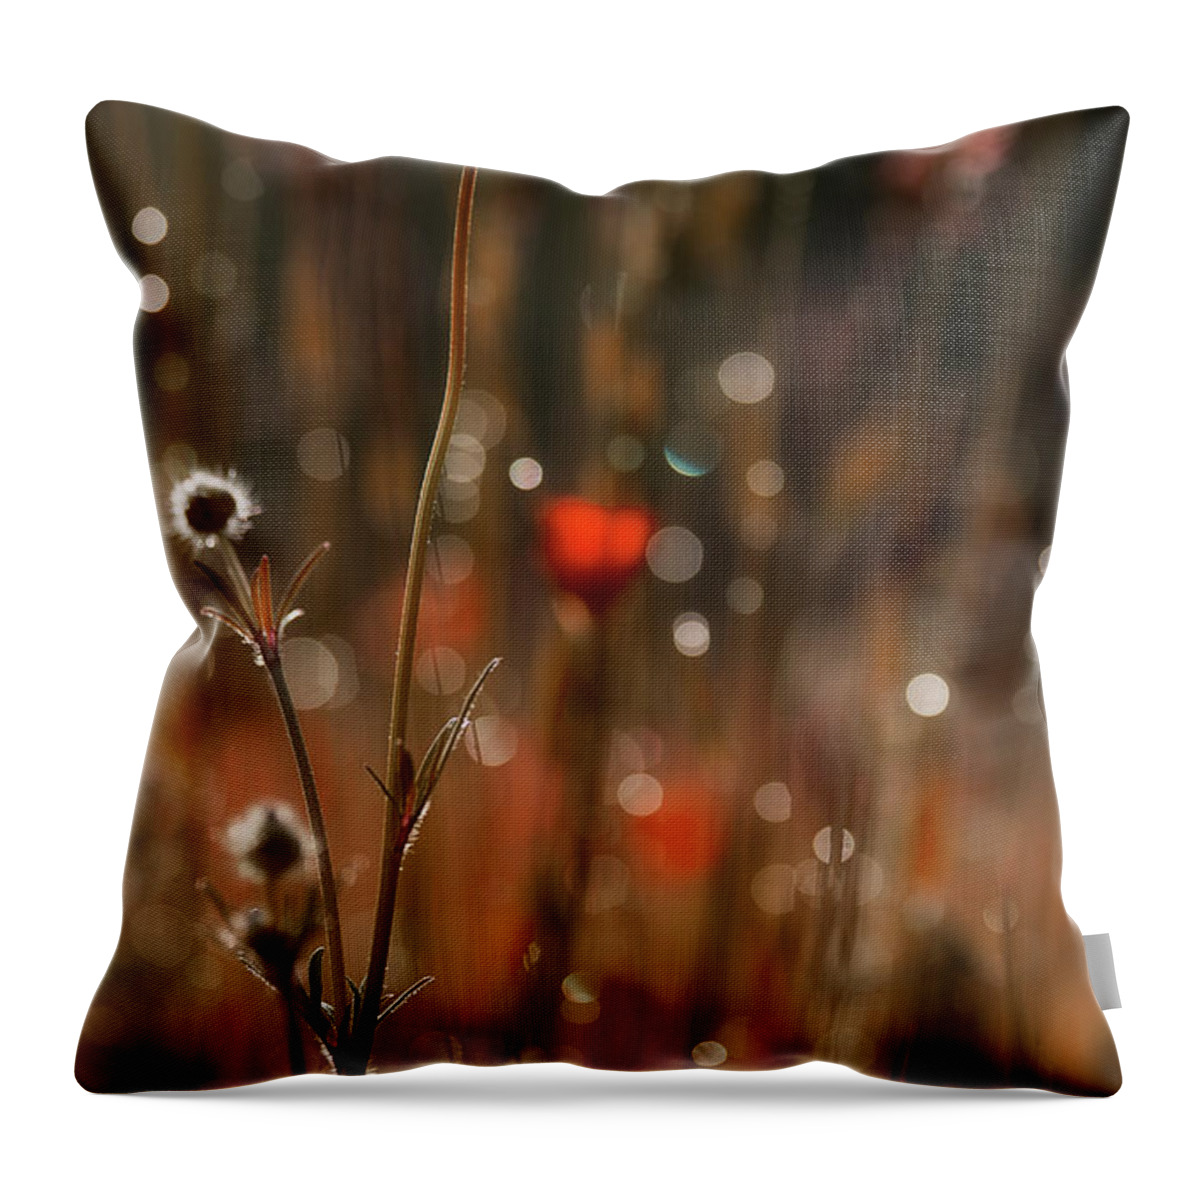 Meadow Flowers Throw Pillow featuring the photograph Along The Edge Of Morning by Mike Eingle